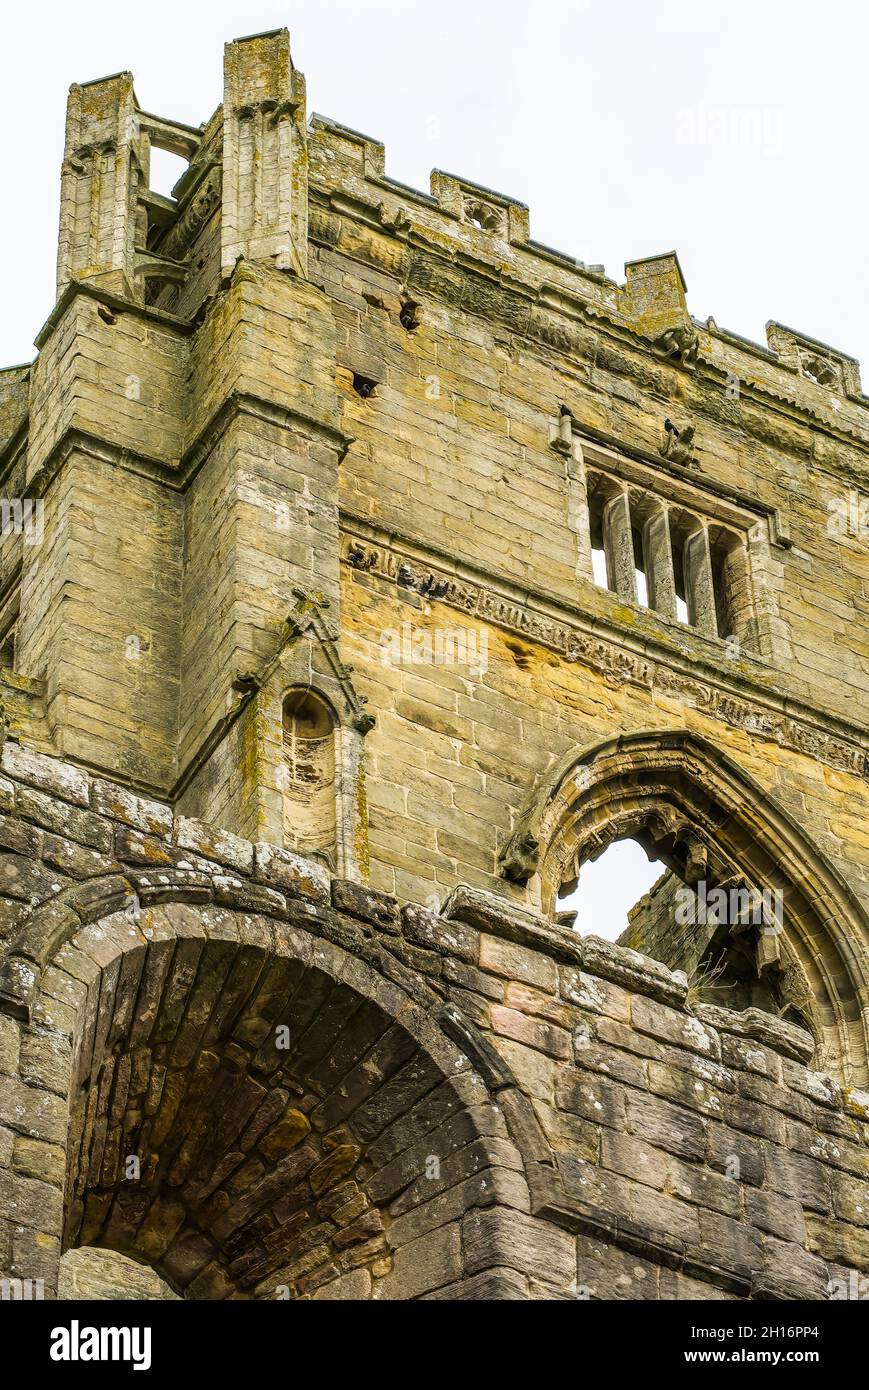 Fountains abbey in Yorkshire England Stock Photo